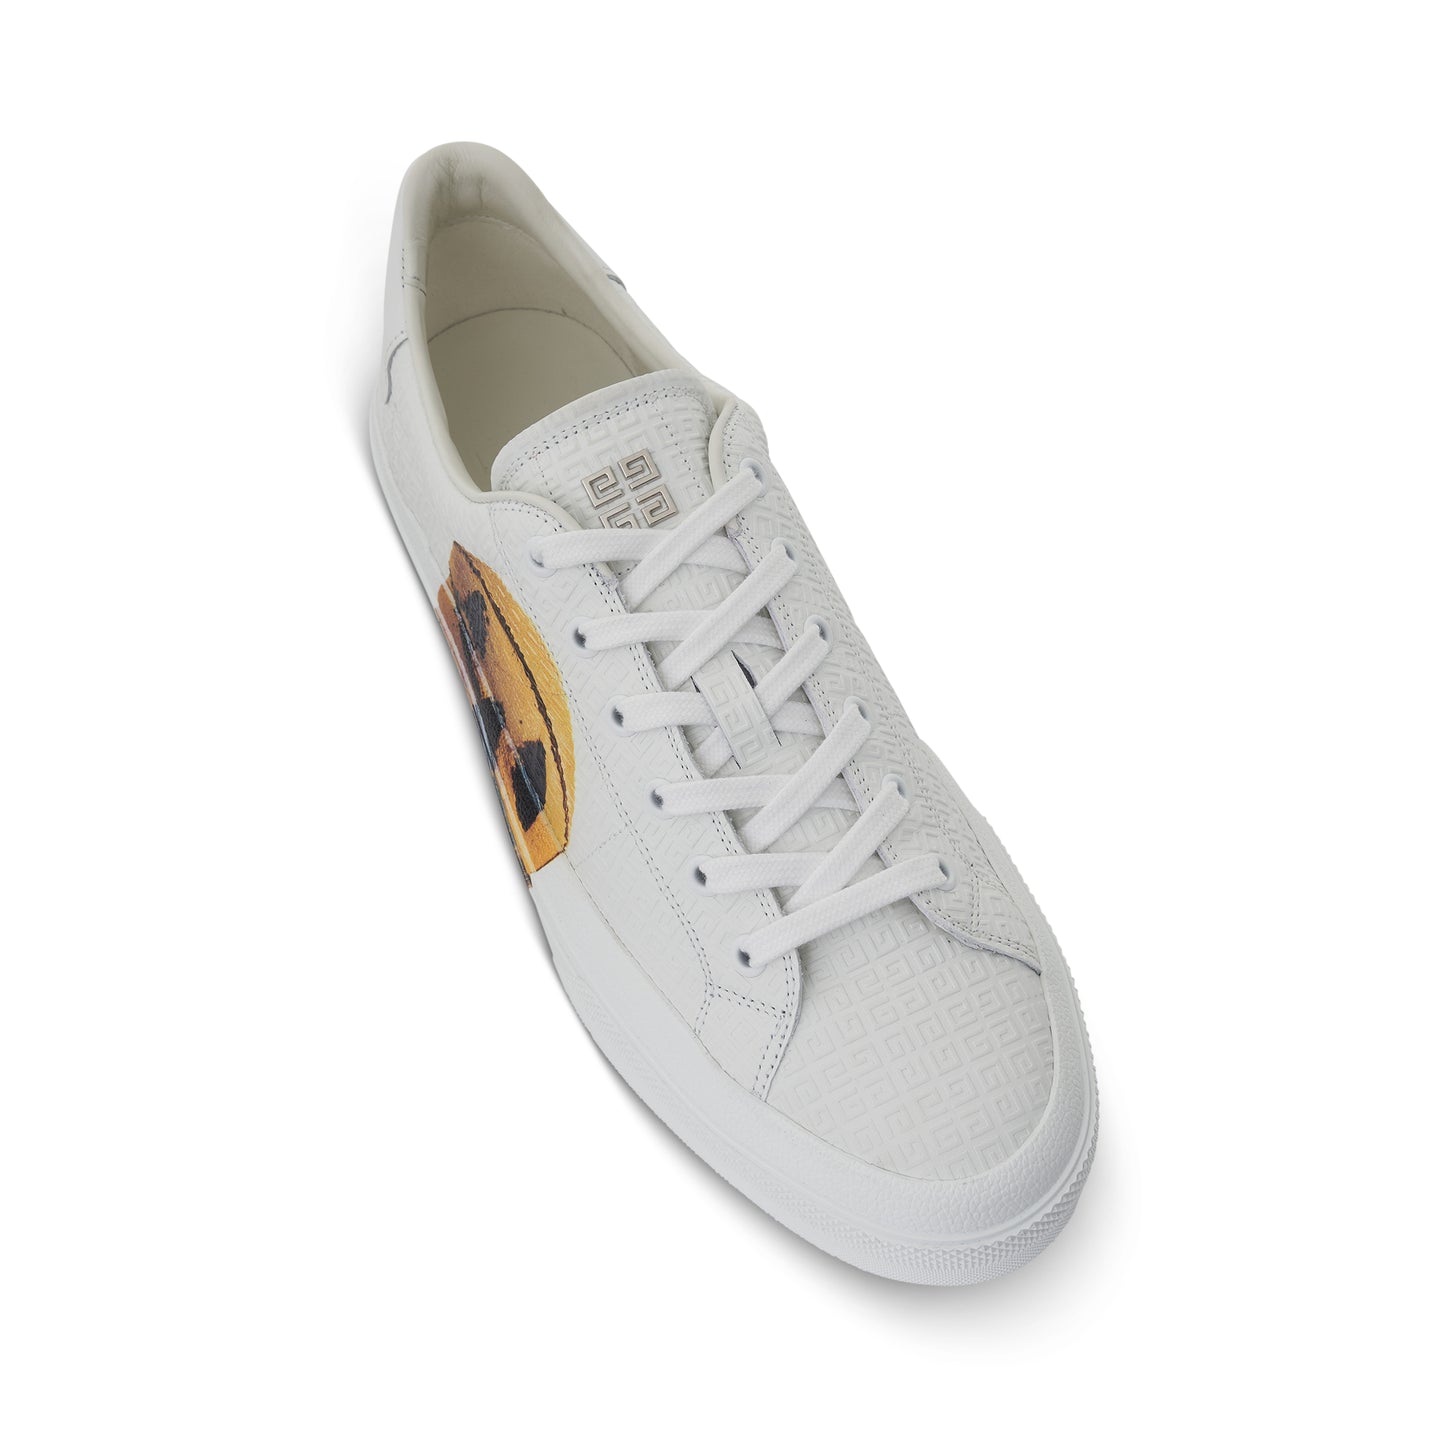 City Sport Lace-Up Sneaker in White